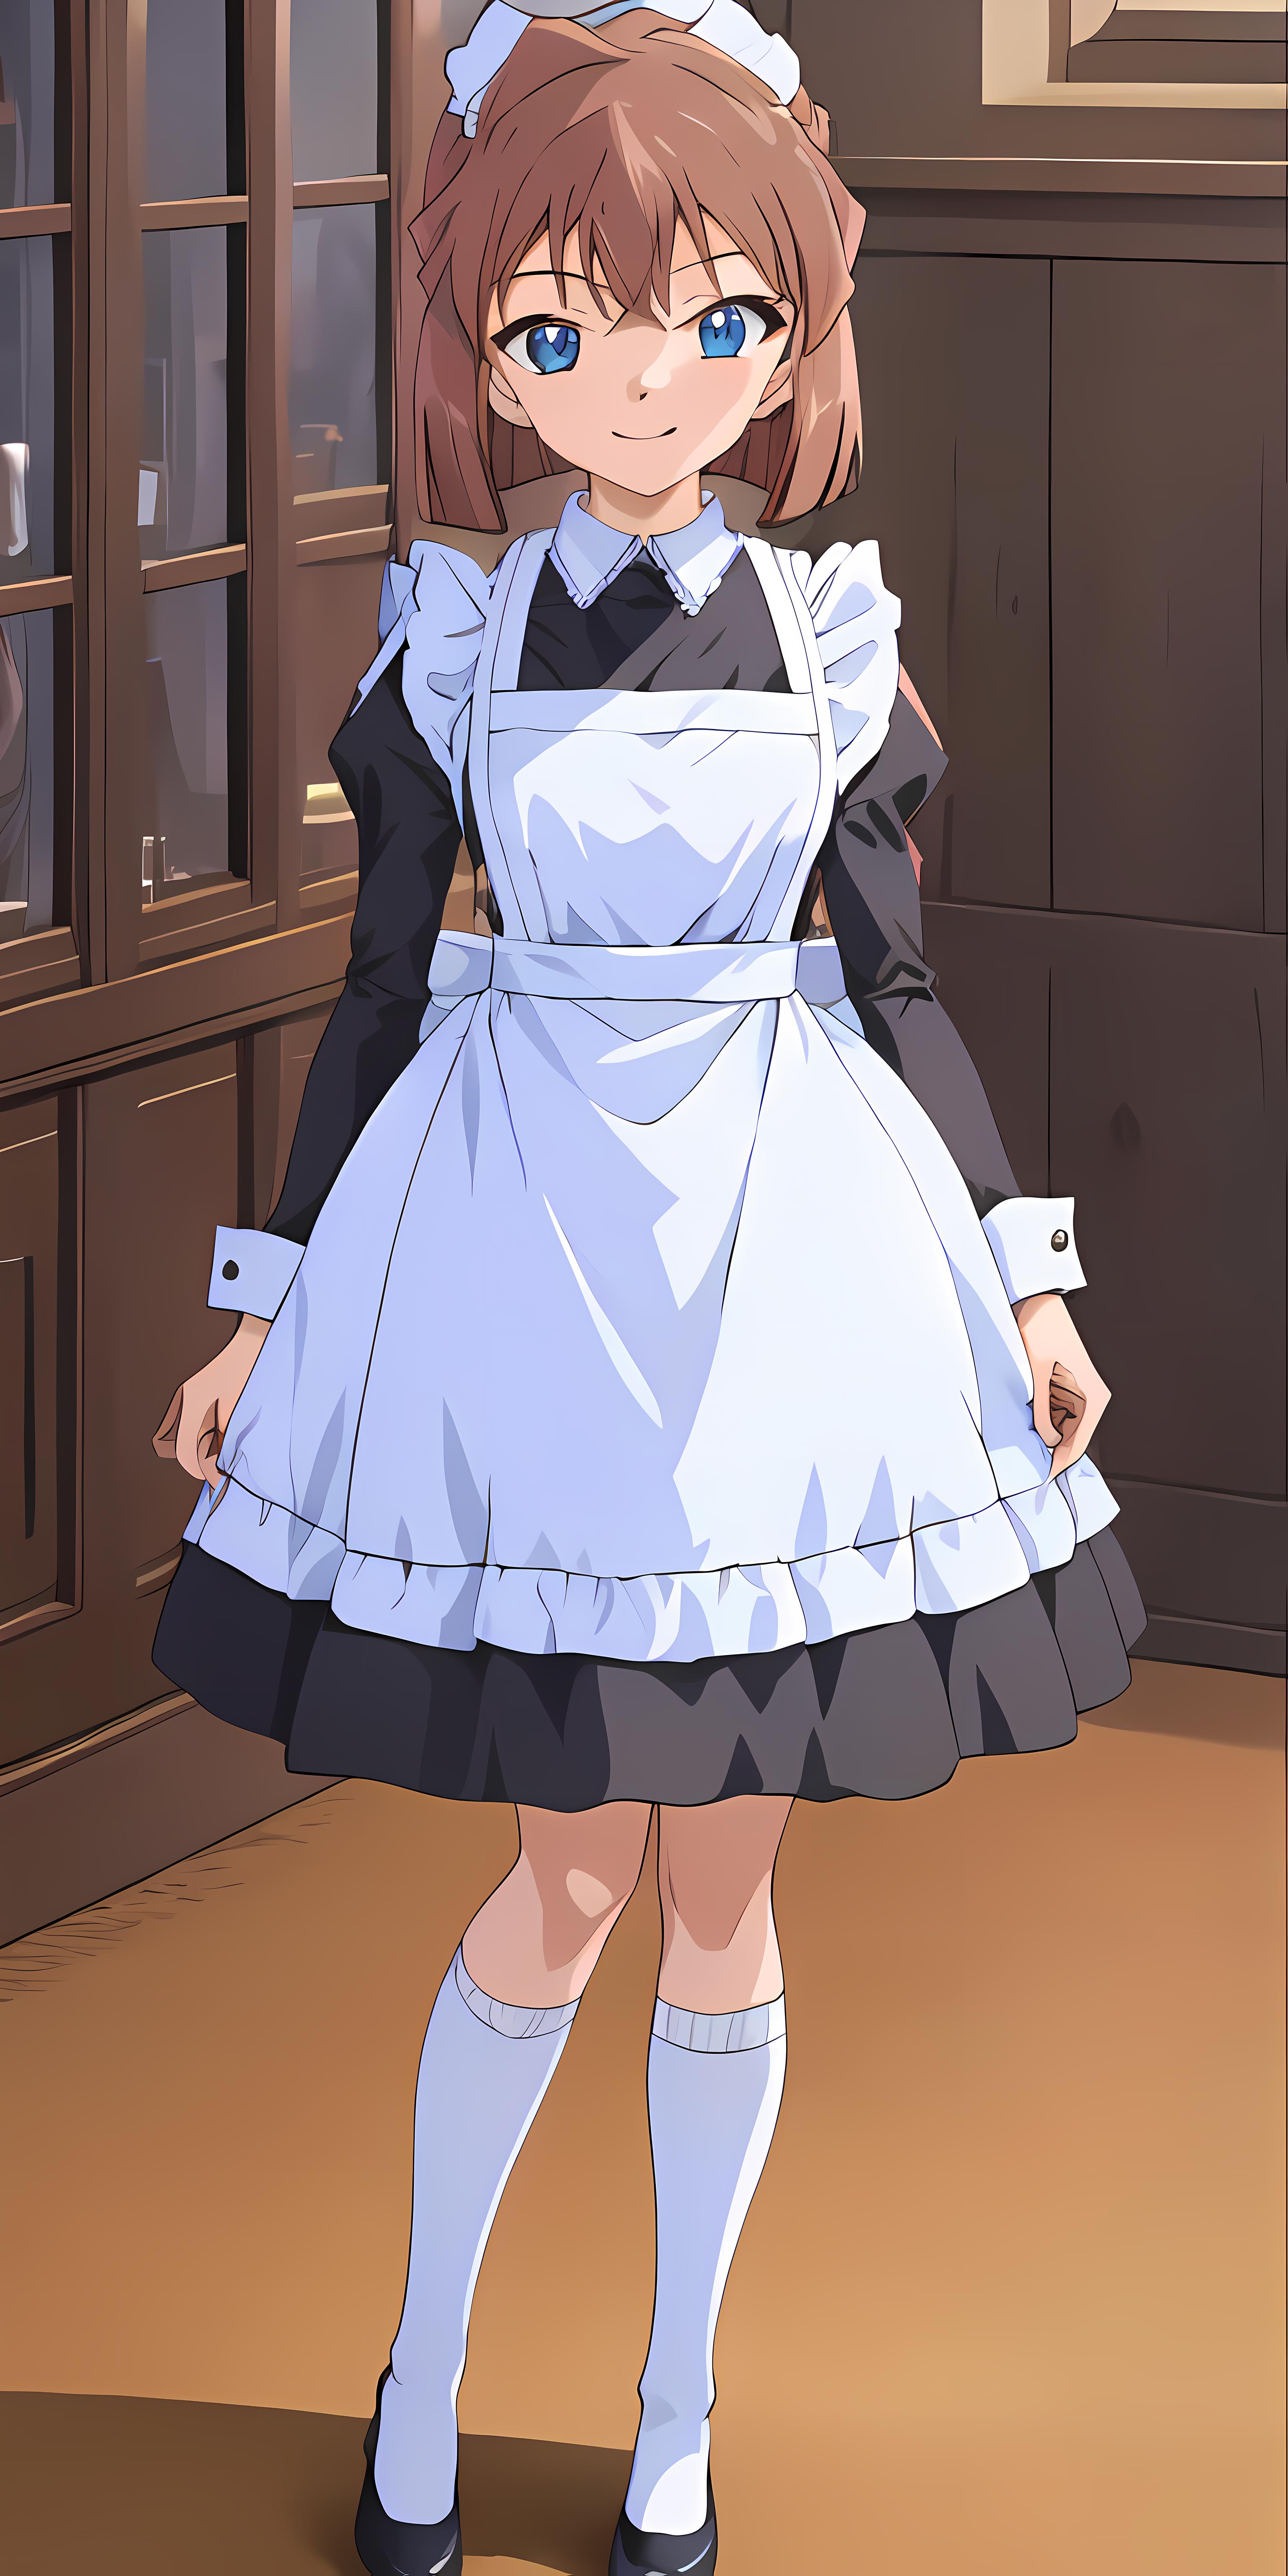 Traditional Maid Dress image by oldperson